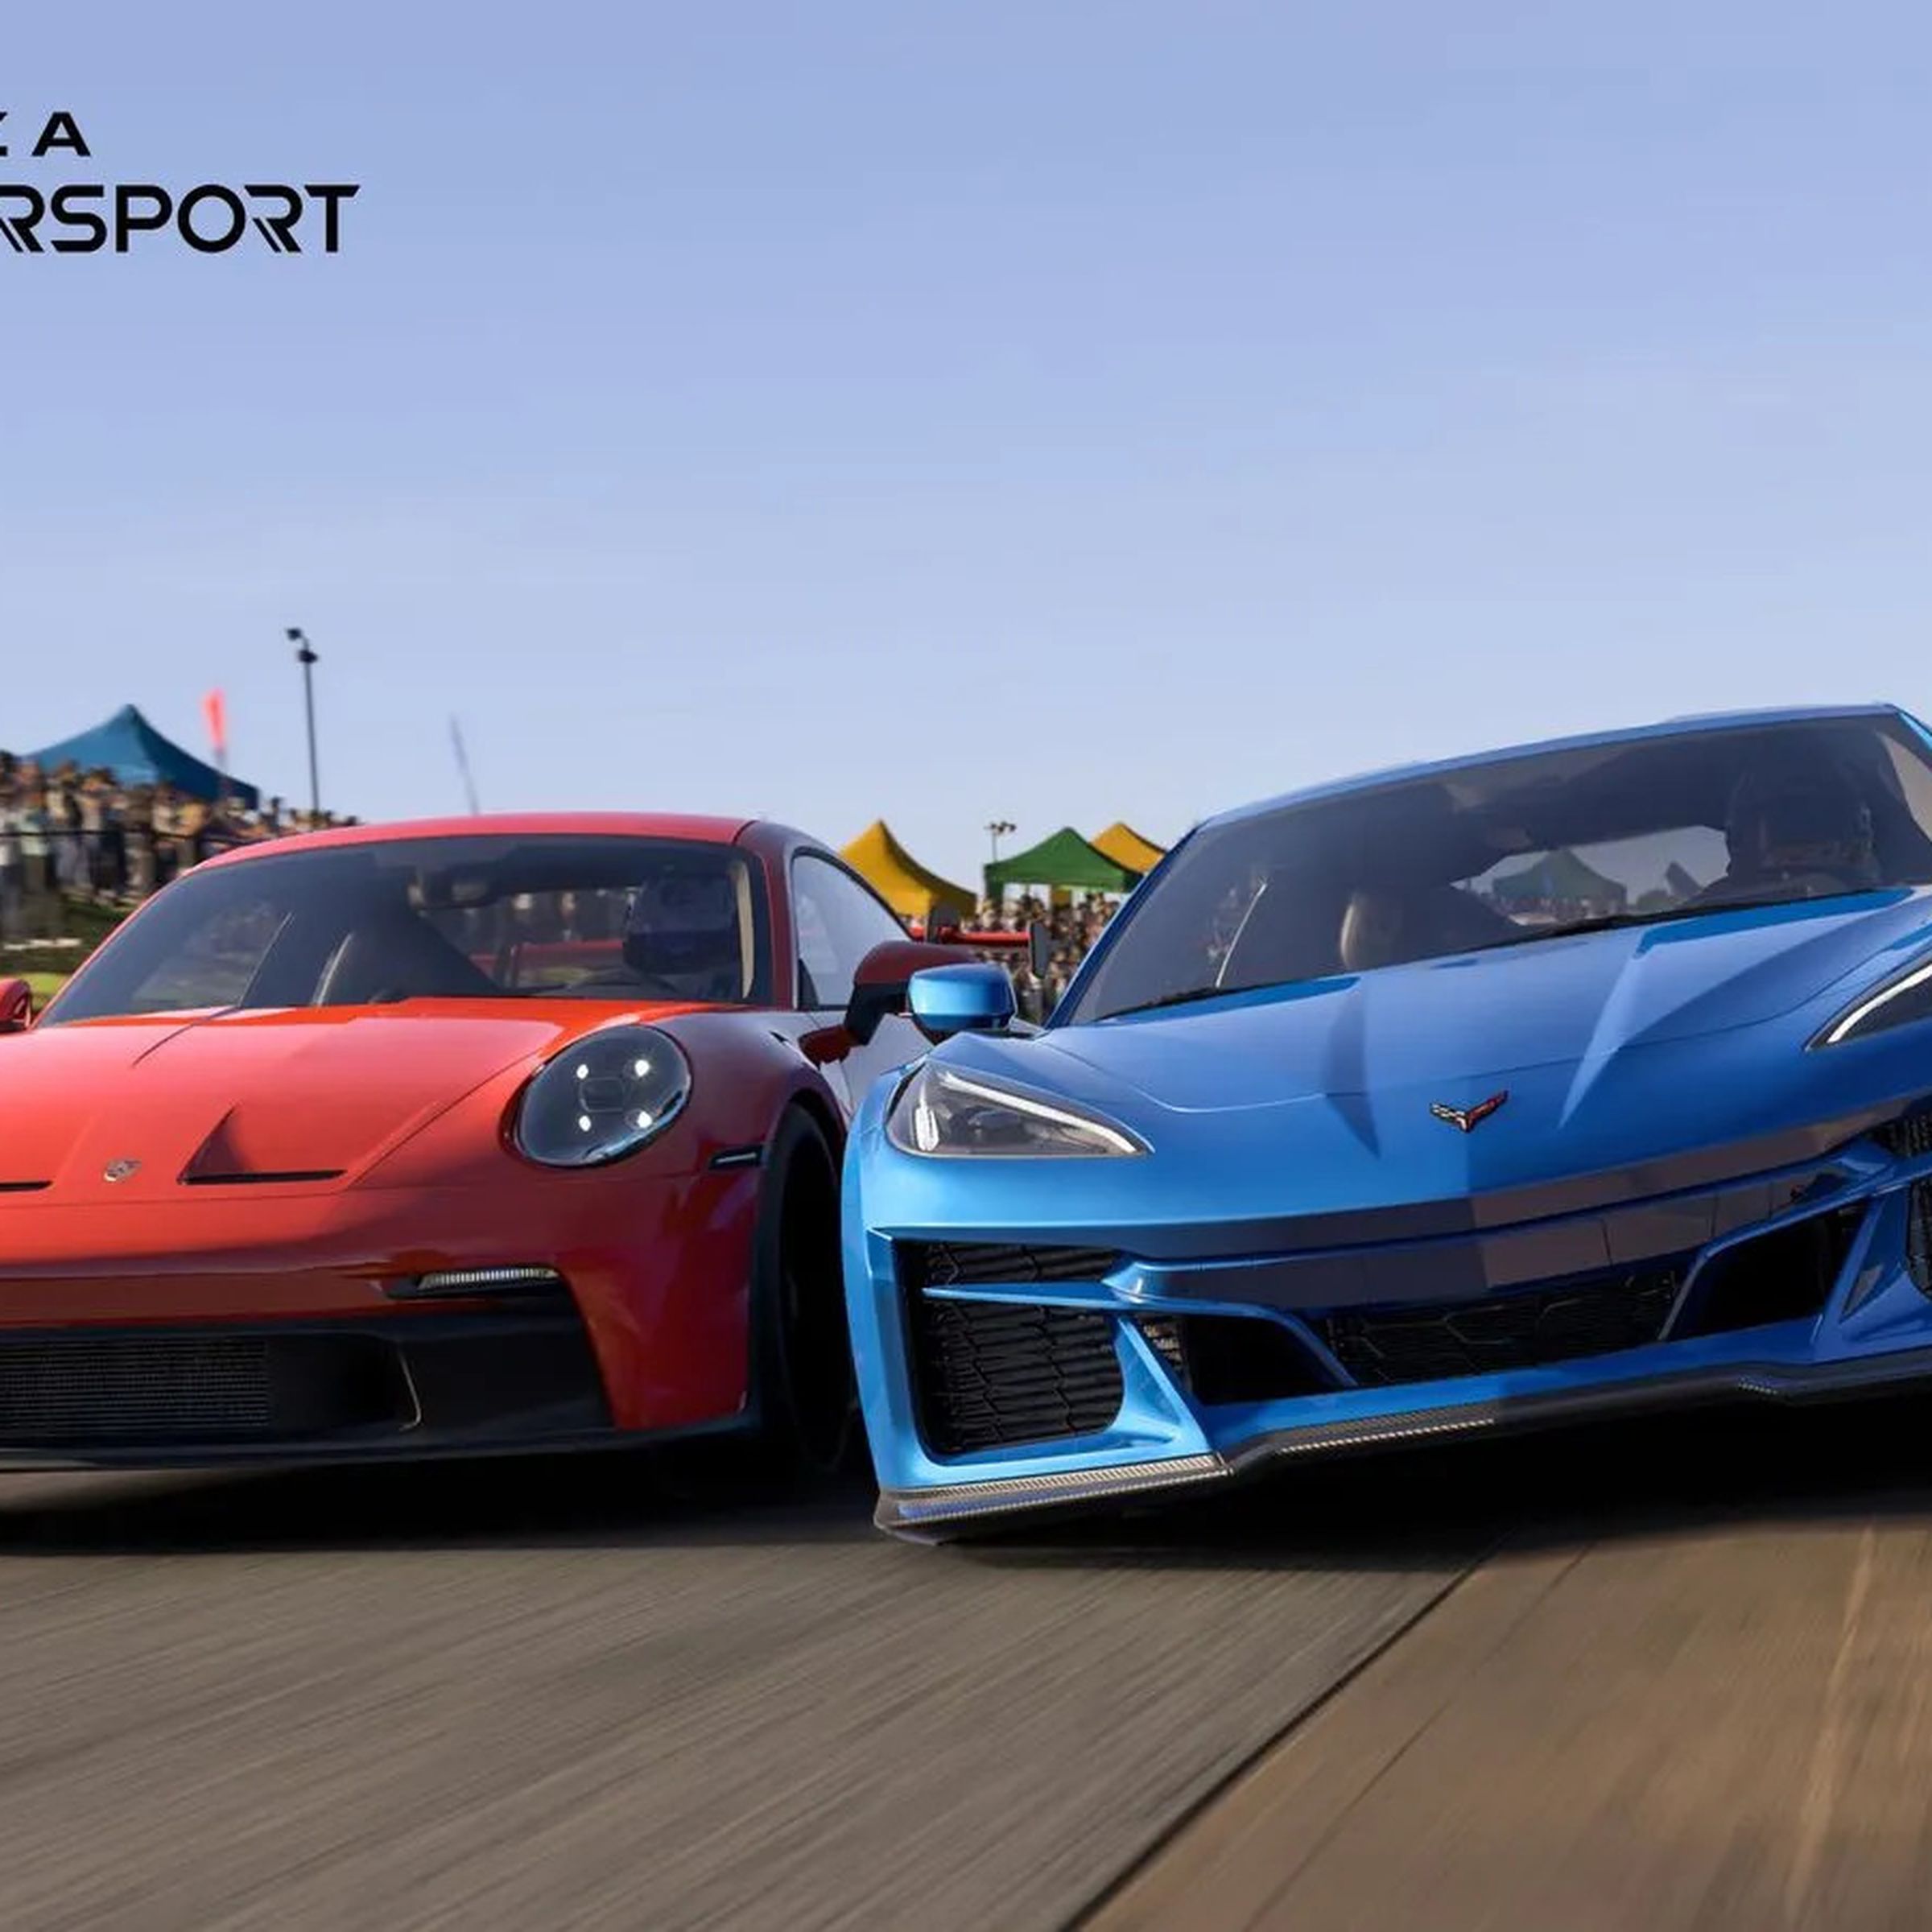 An image showing two cars on a racetrack in Forza Motorsport